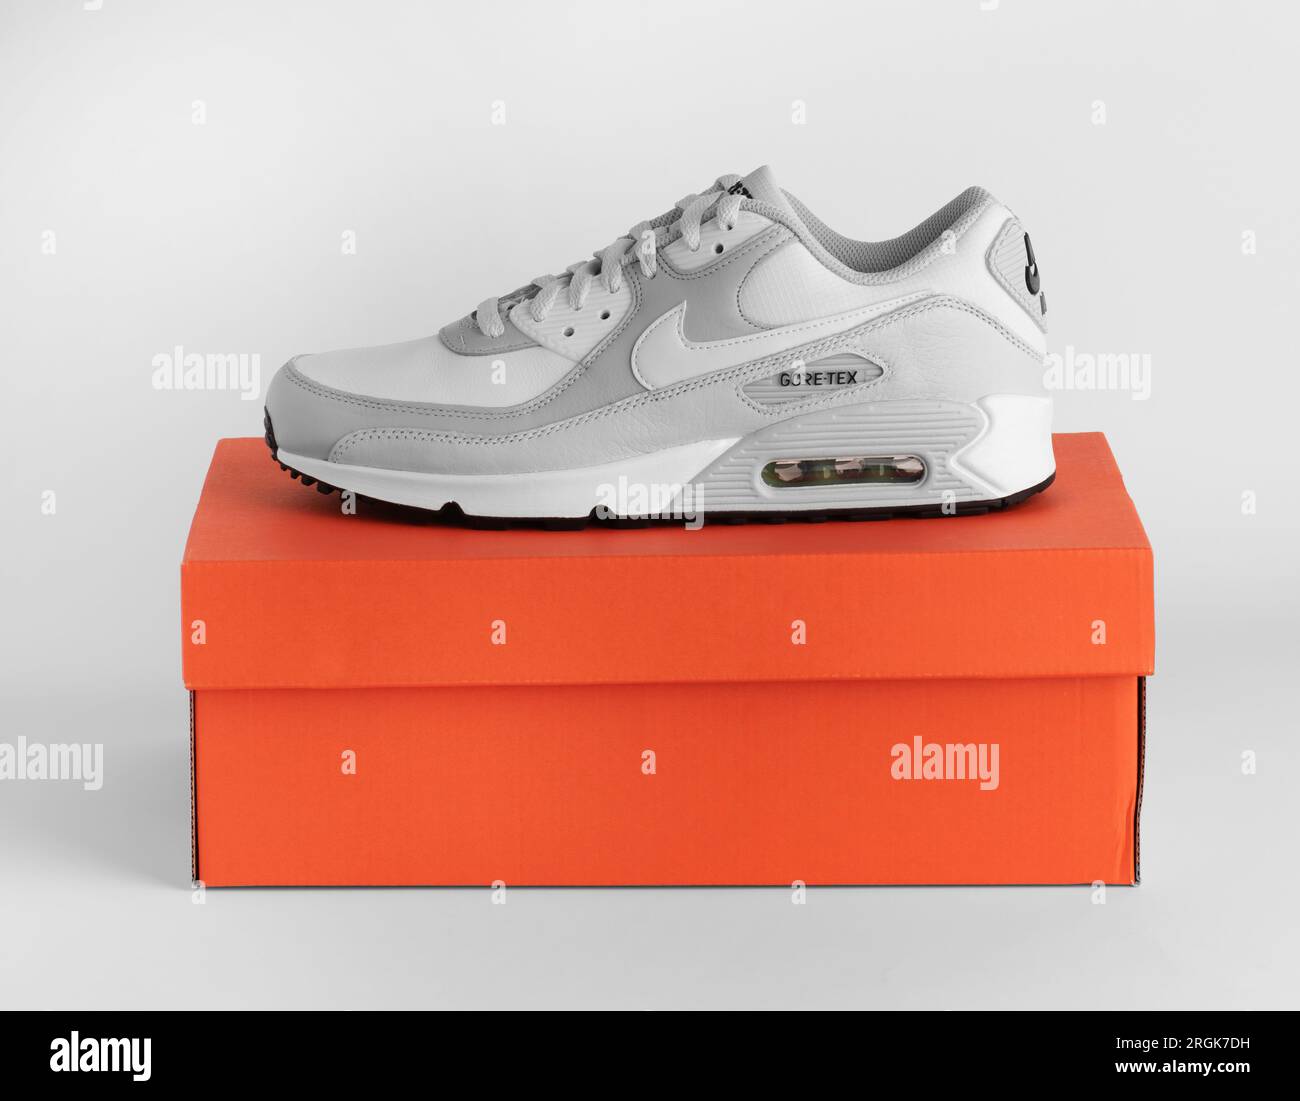 Istanbul, Turkey - April 12, 2023: Nike Air Max 90 GTX model shoes on white background. White and Gray color GORE-TEX shoes. Stock Photo